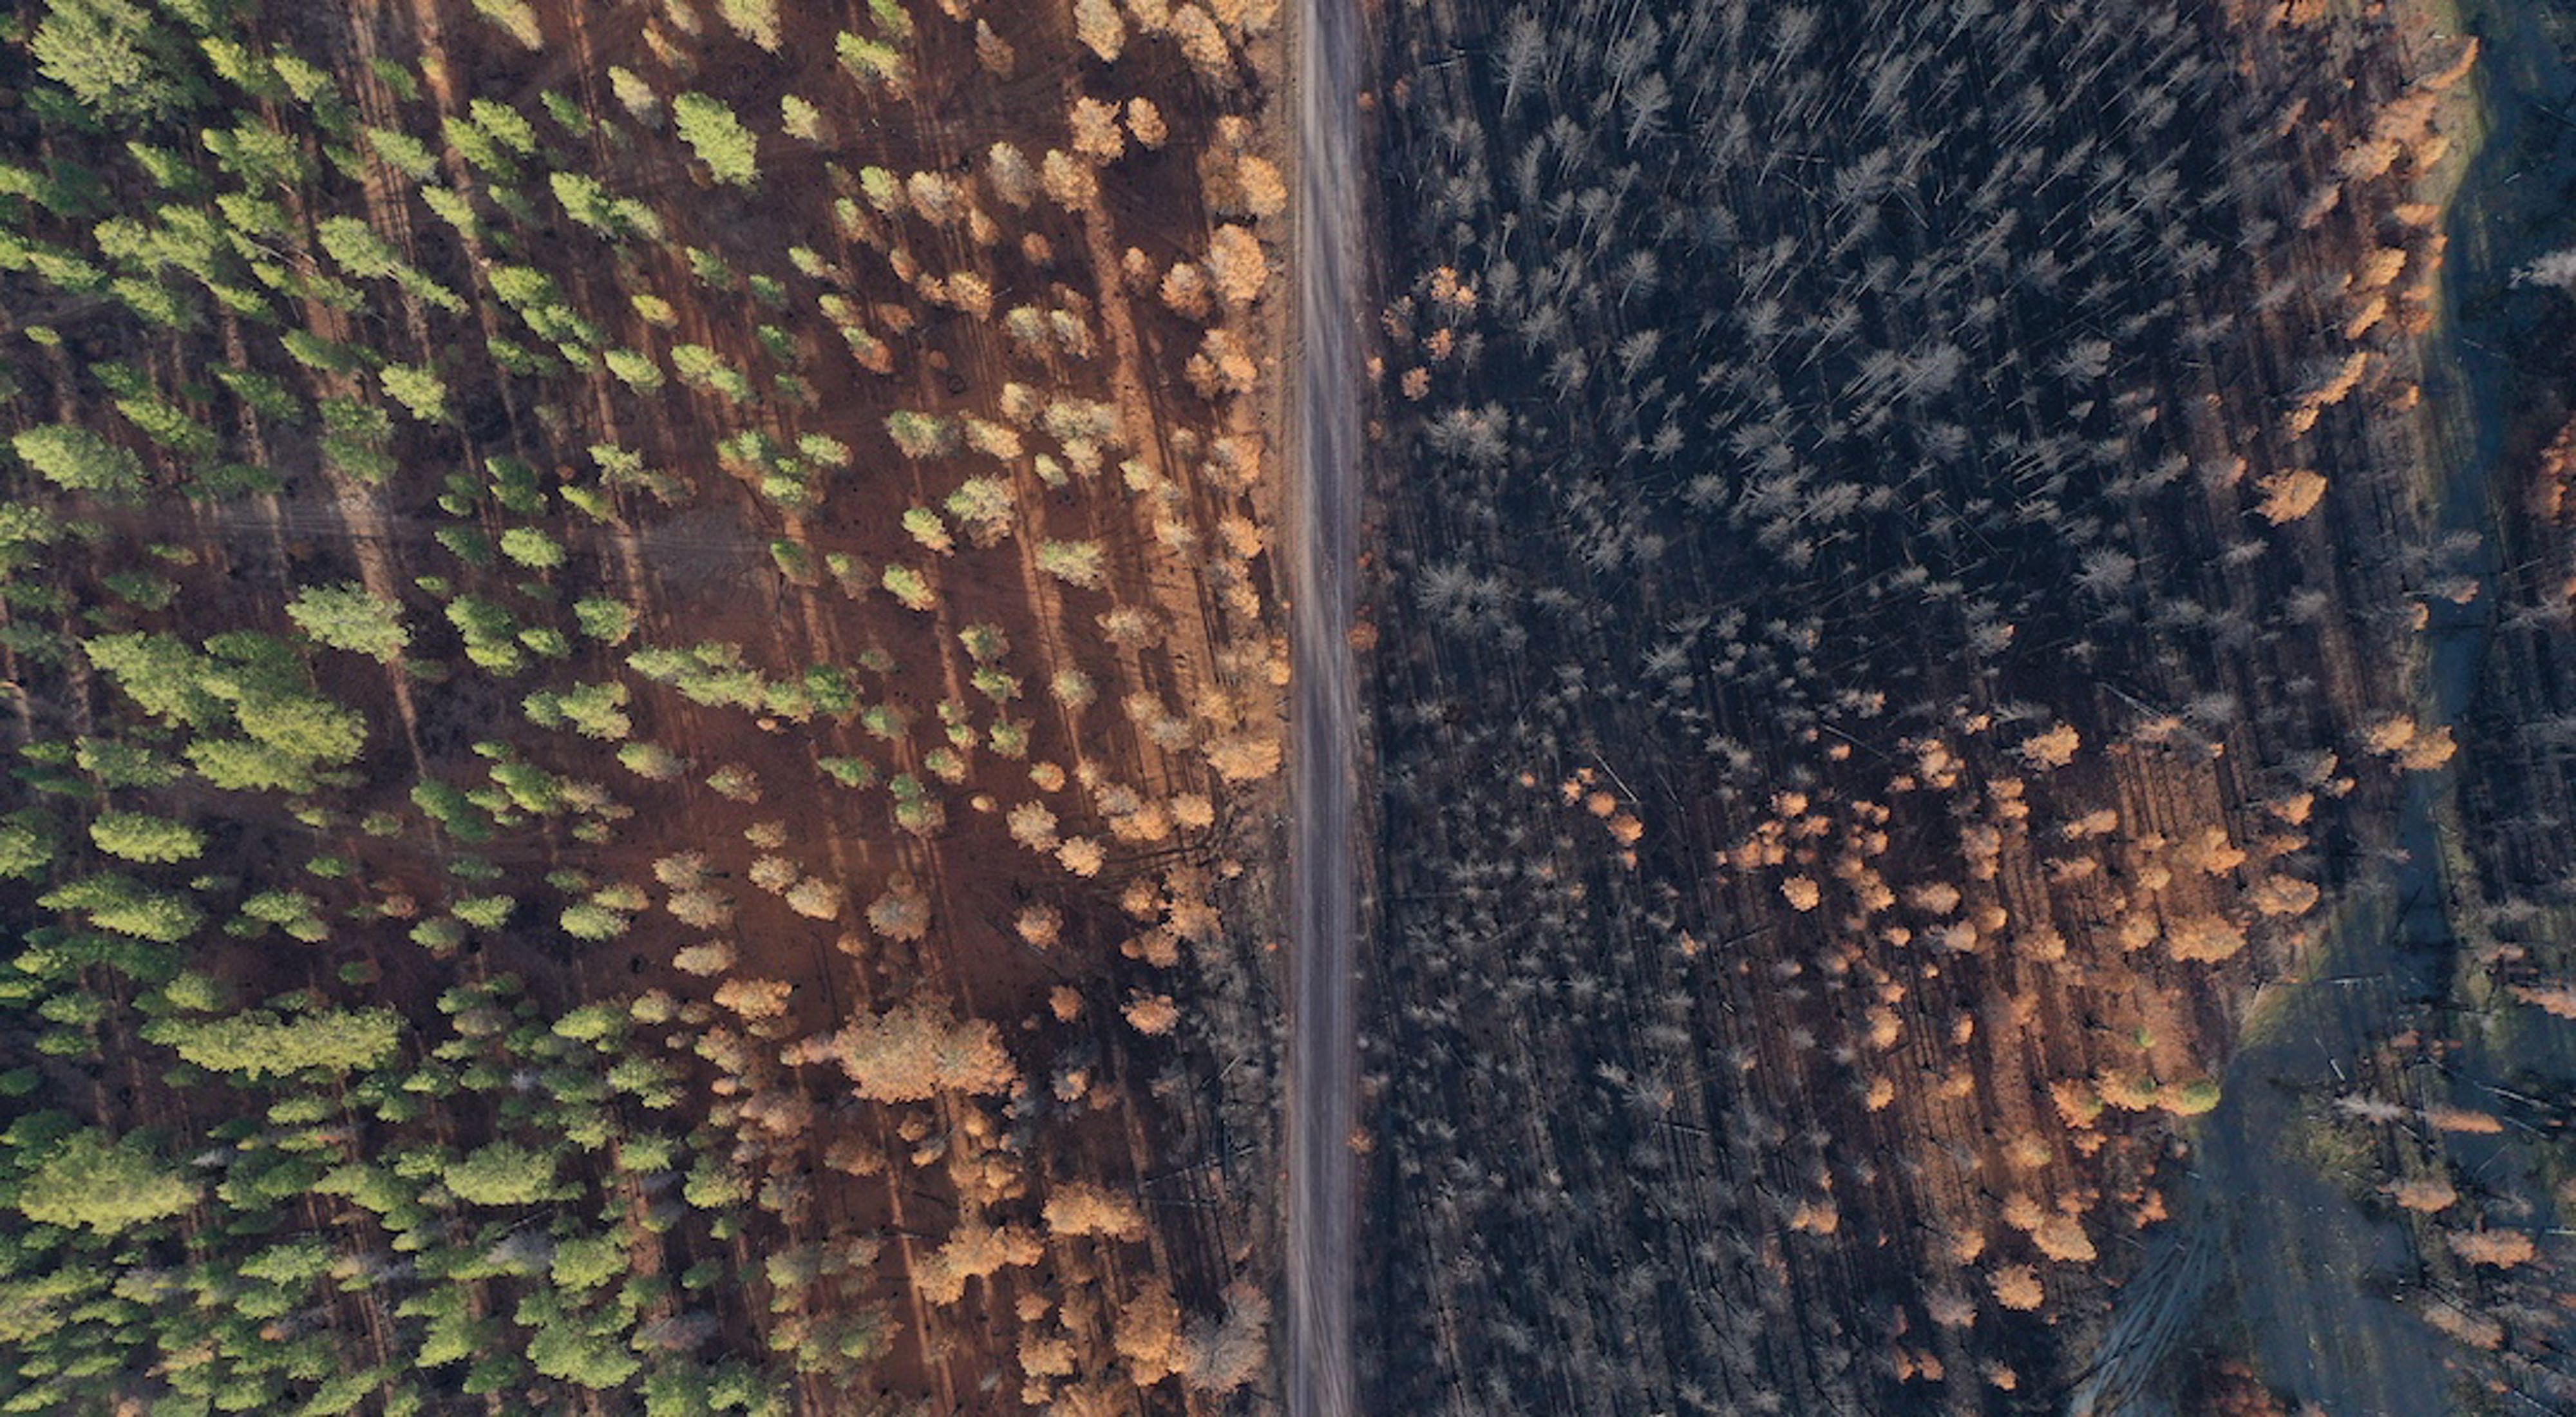 A drone shot of the Coyote Area after the Bootleg Fire showing a road bisecting a forest; the right half of the forest is burned, while the left half is not.